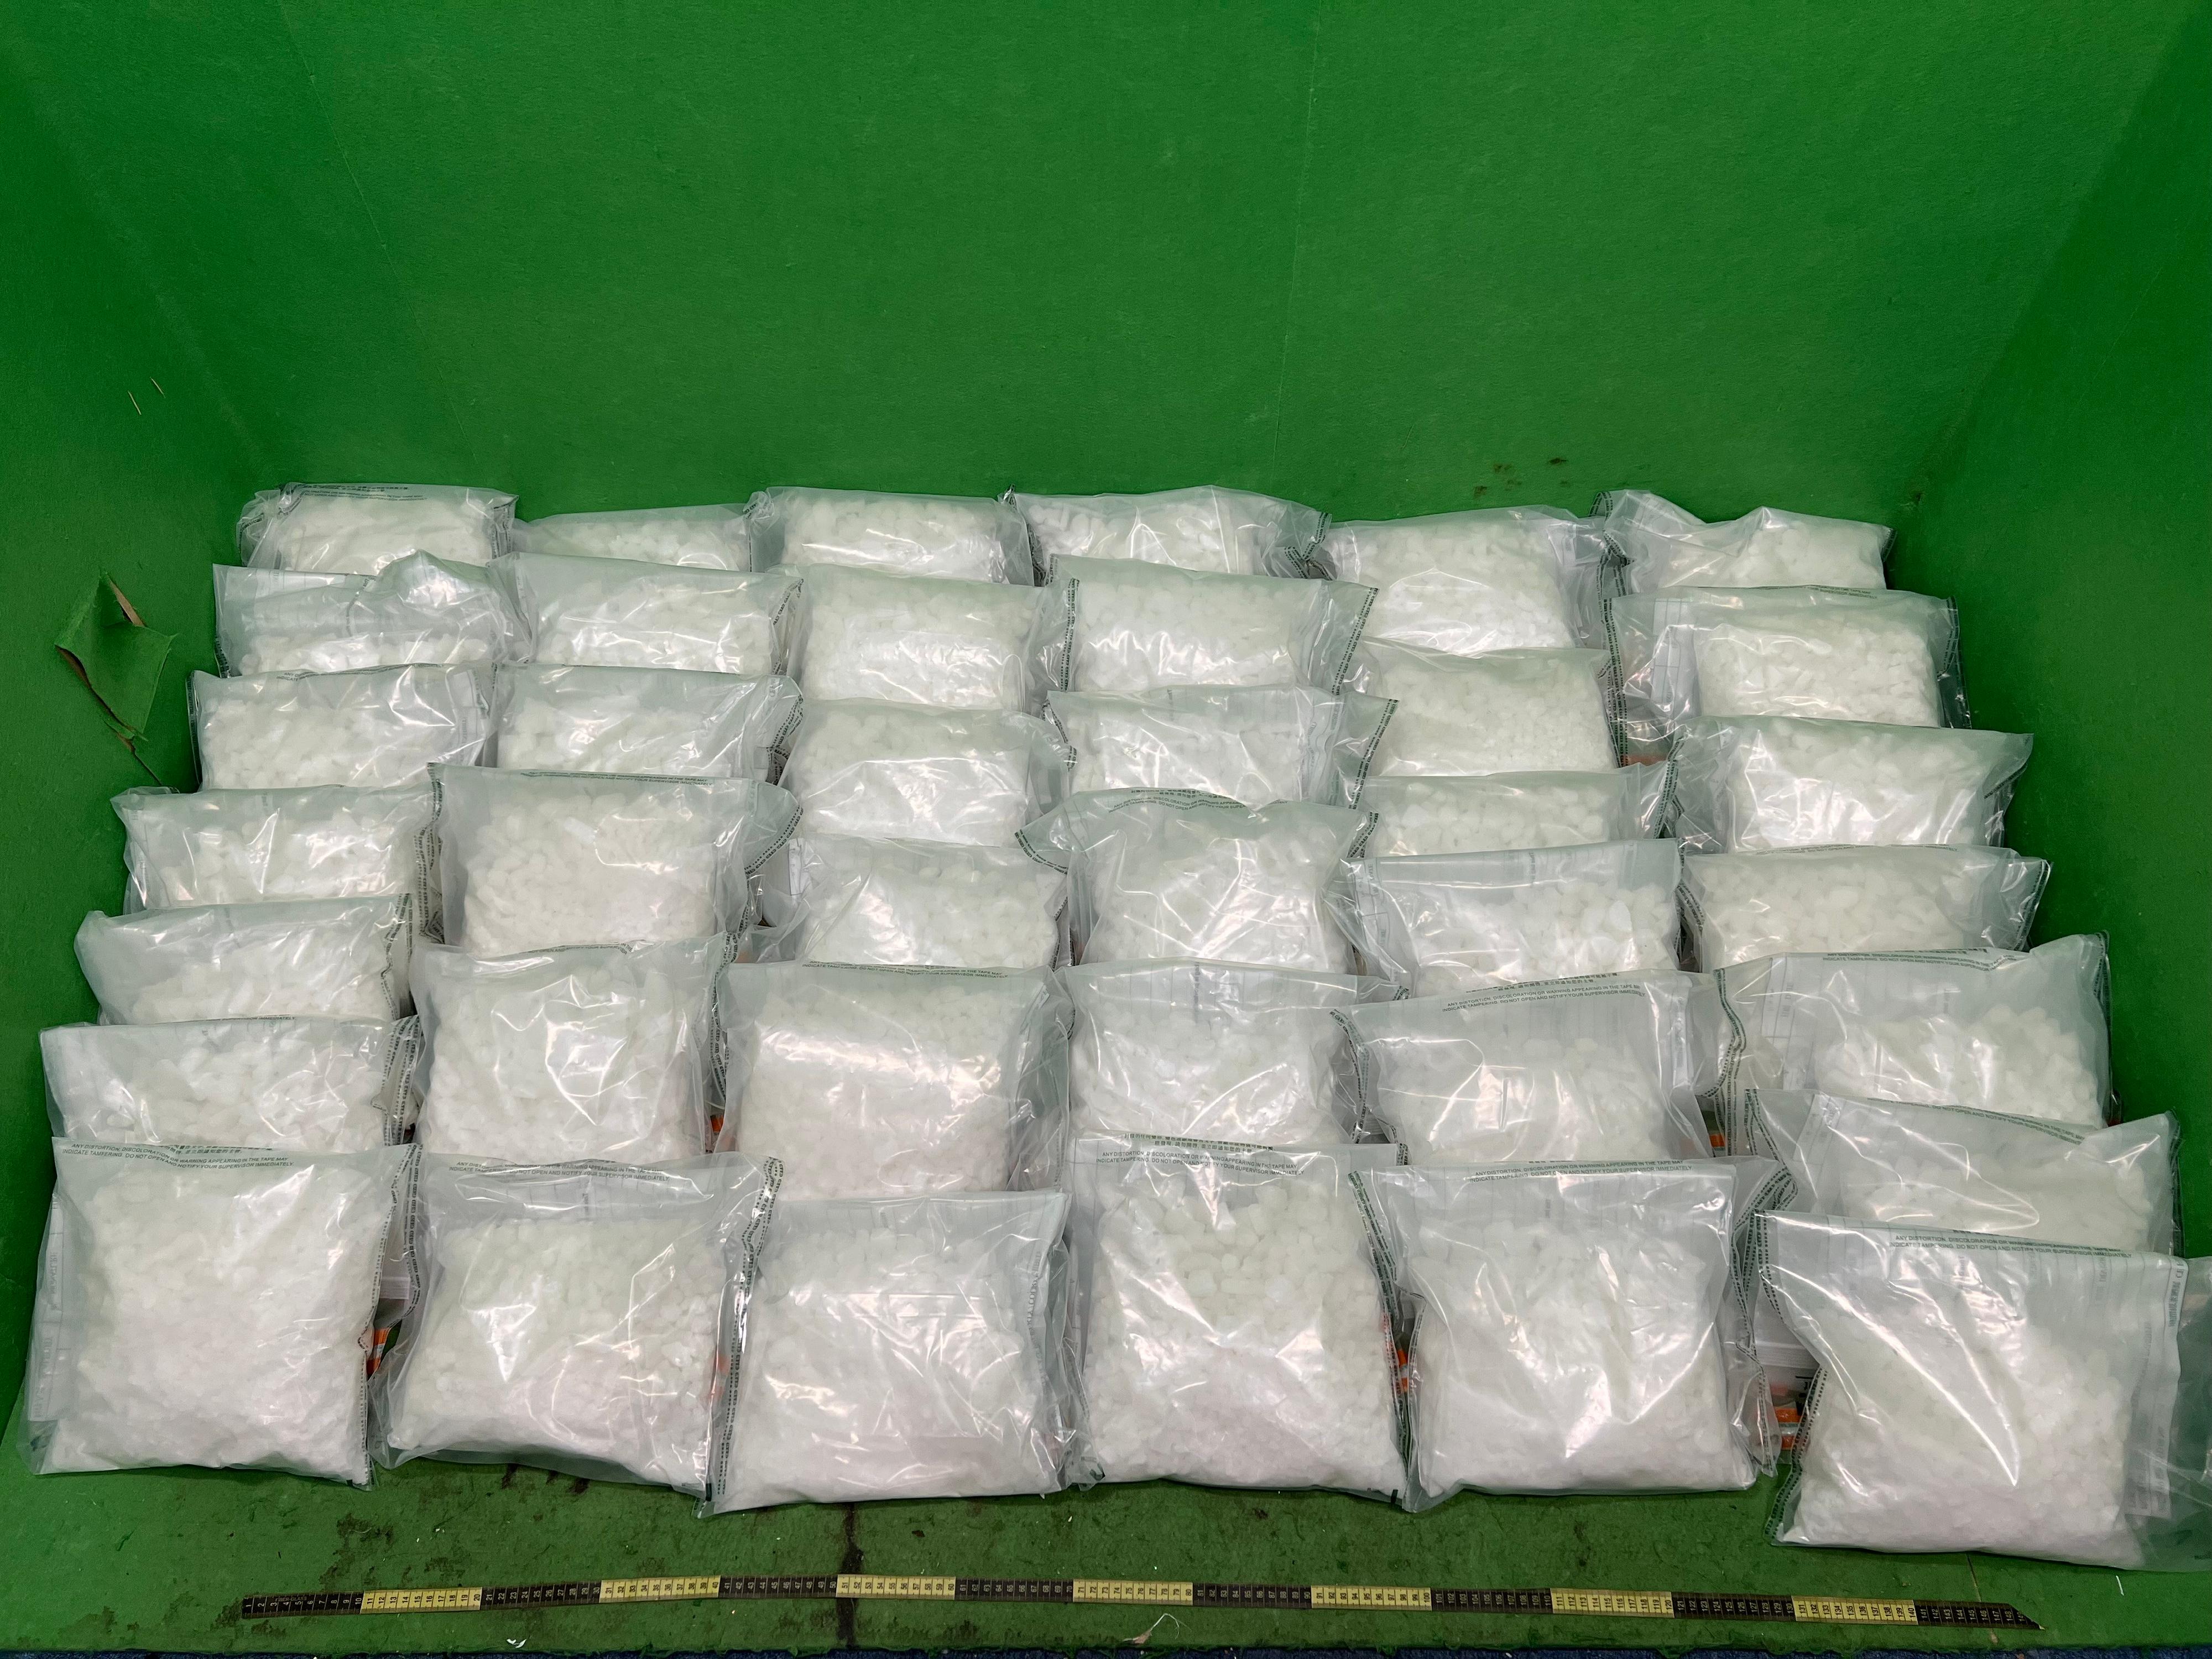 Hong Kong Customs on April 9 seized about 129 kilograms of suspected ketamine with an estimated market value of about $71 million at Hong Kong International Airport. Photos shows some of the suspected ketamine seized.